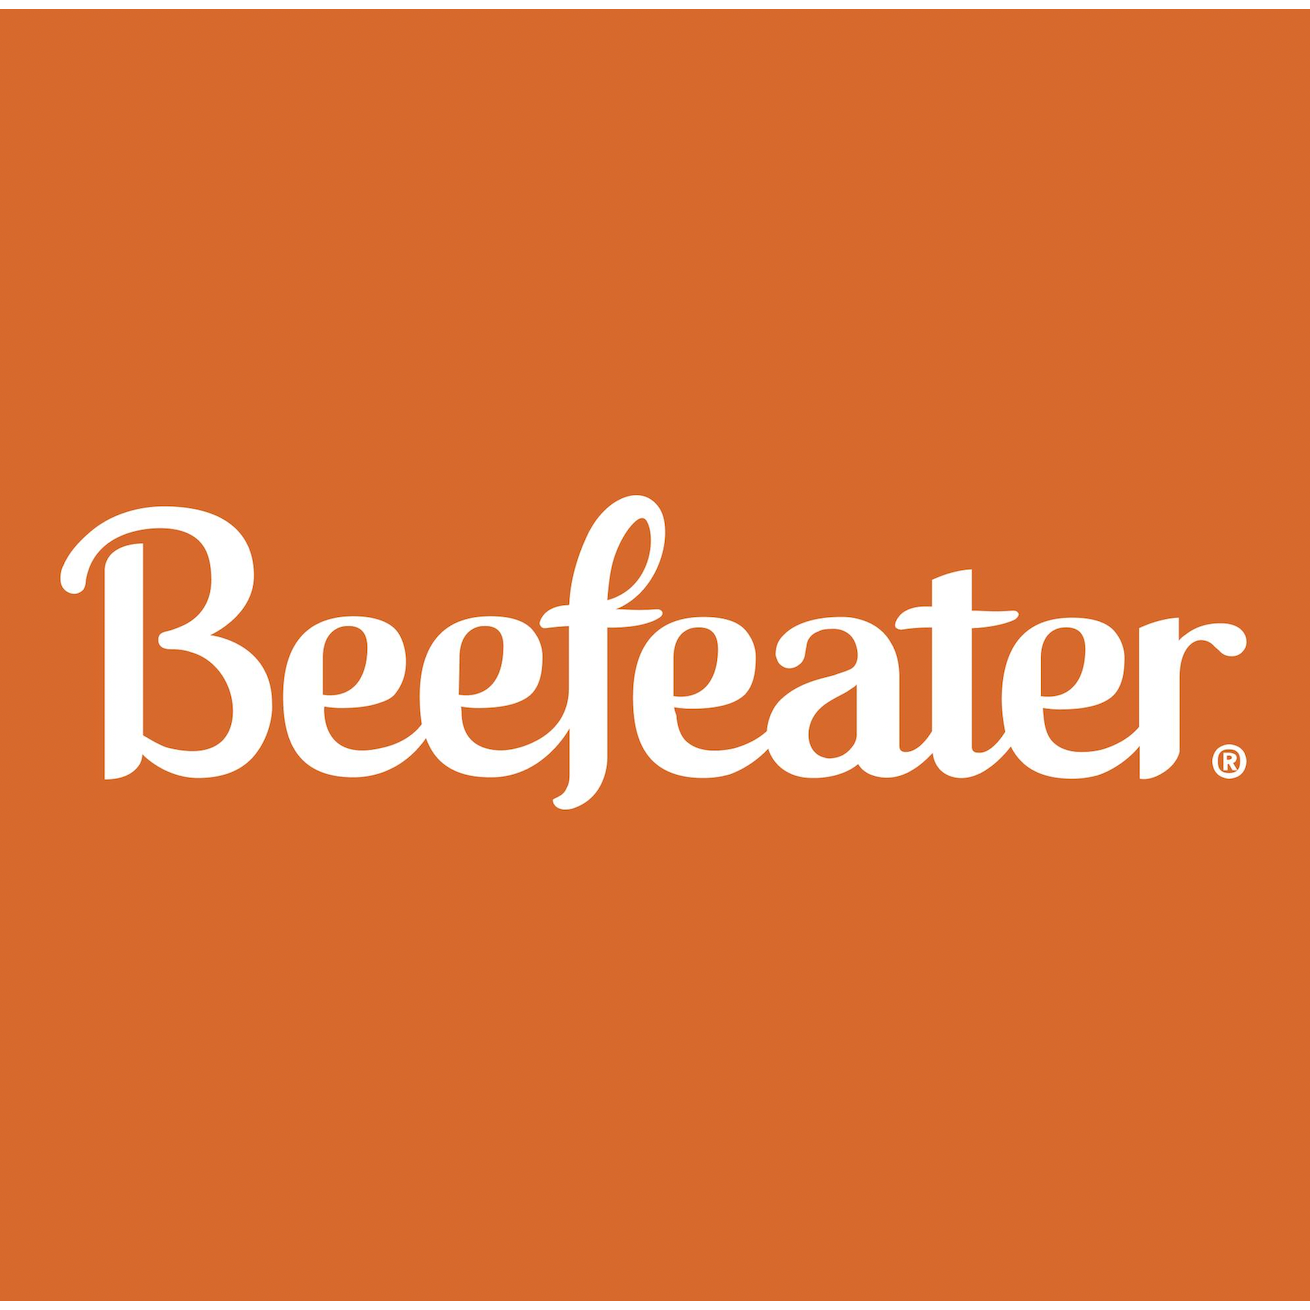 The Belgrave Beefeater